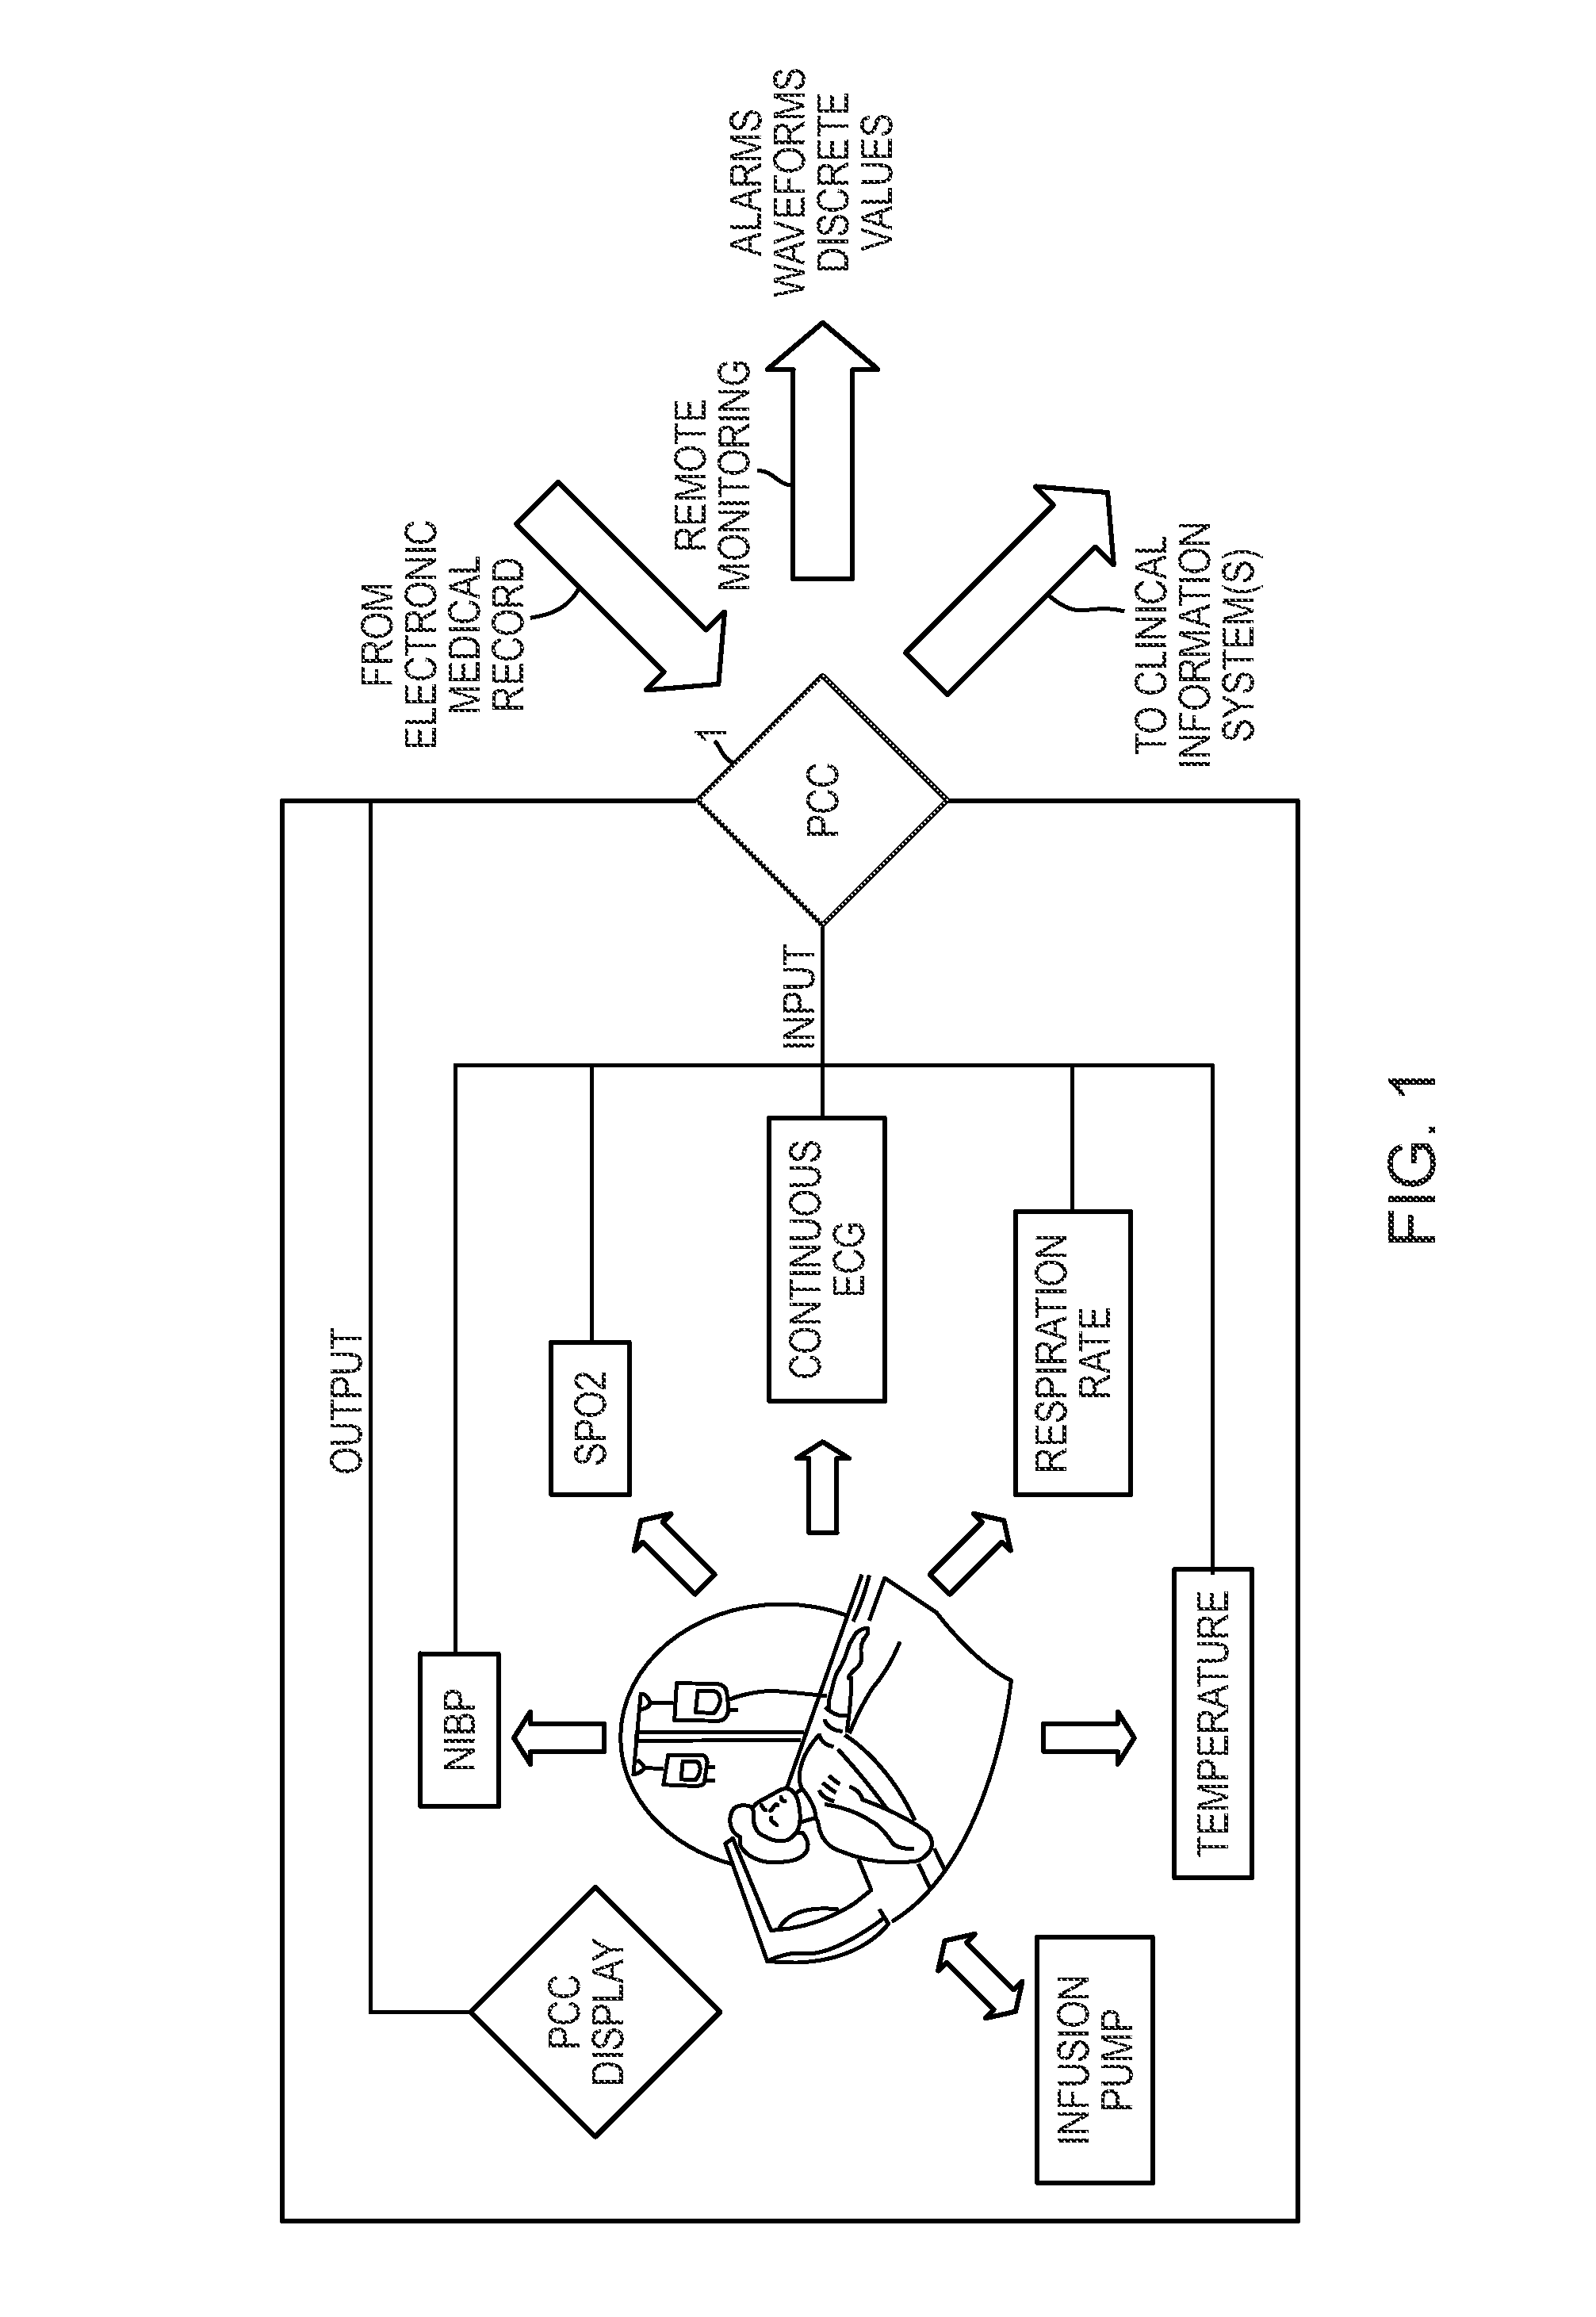 System and method for patient care